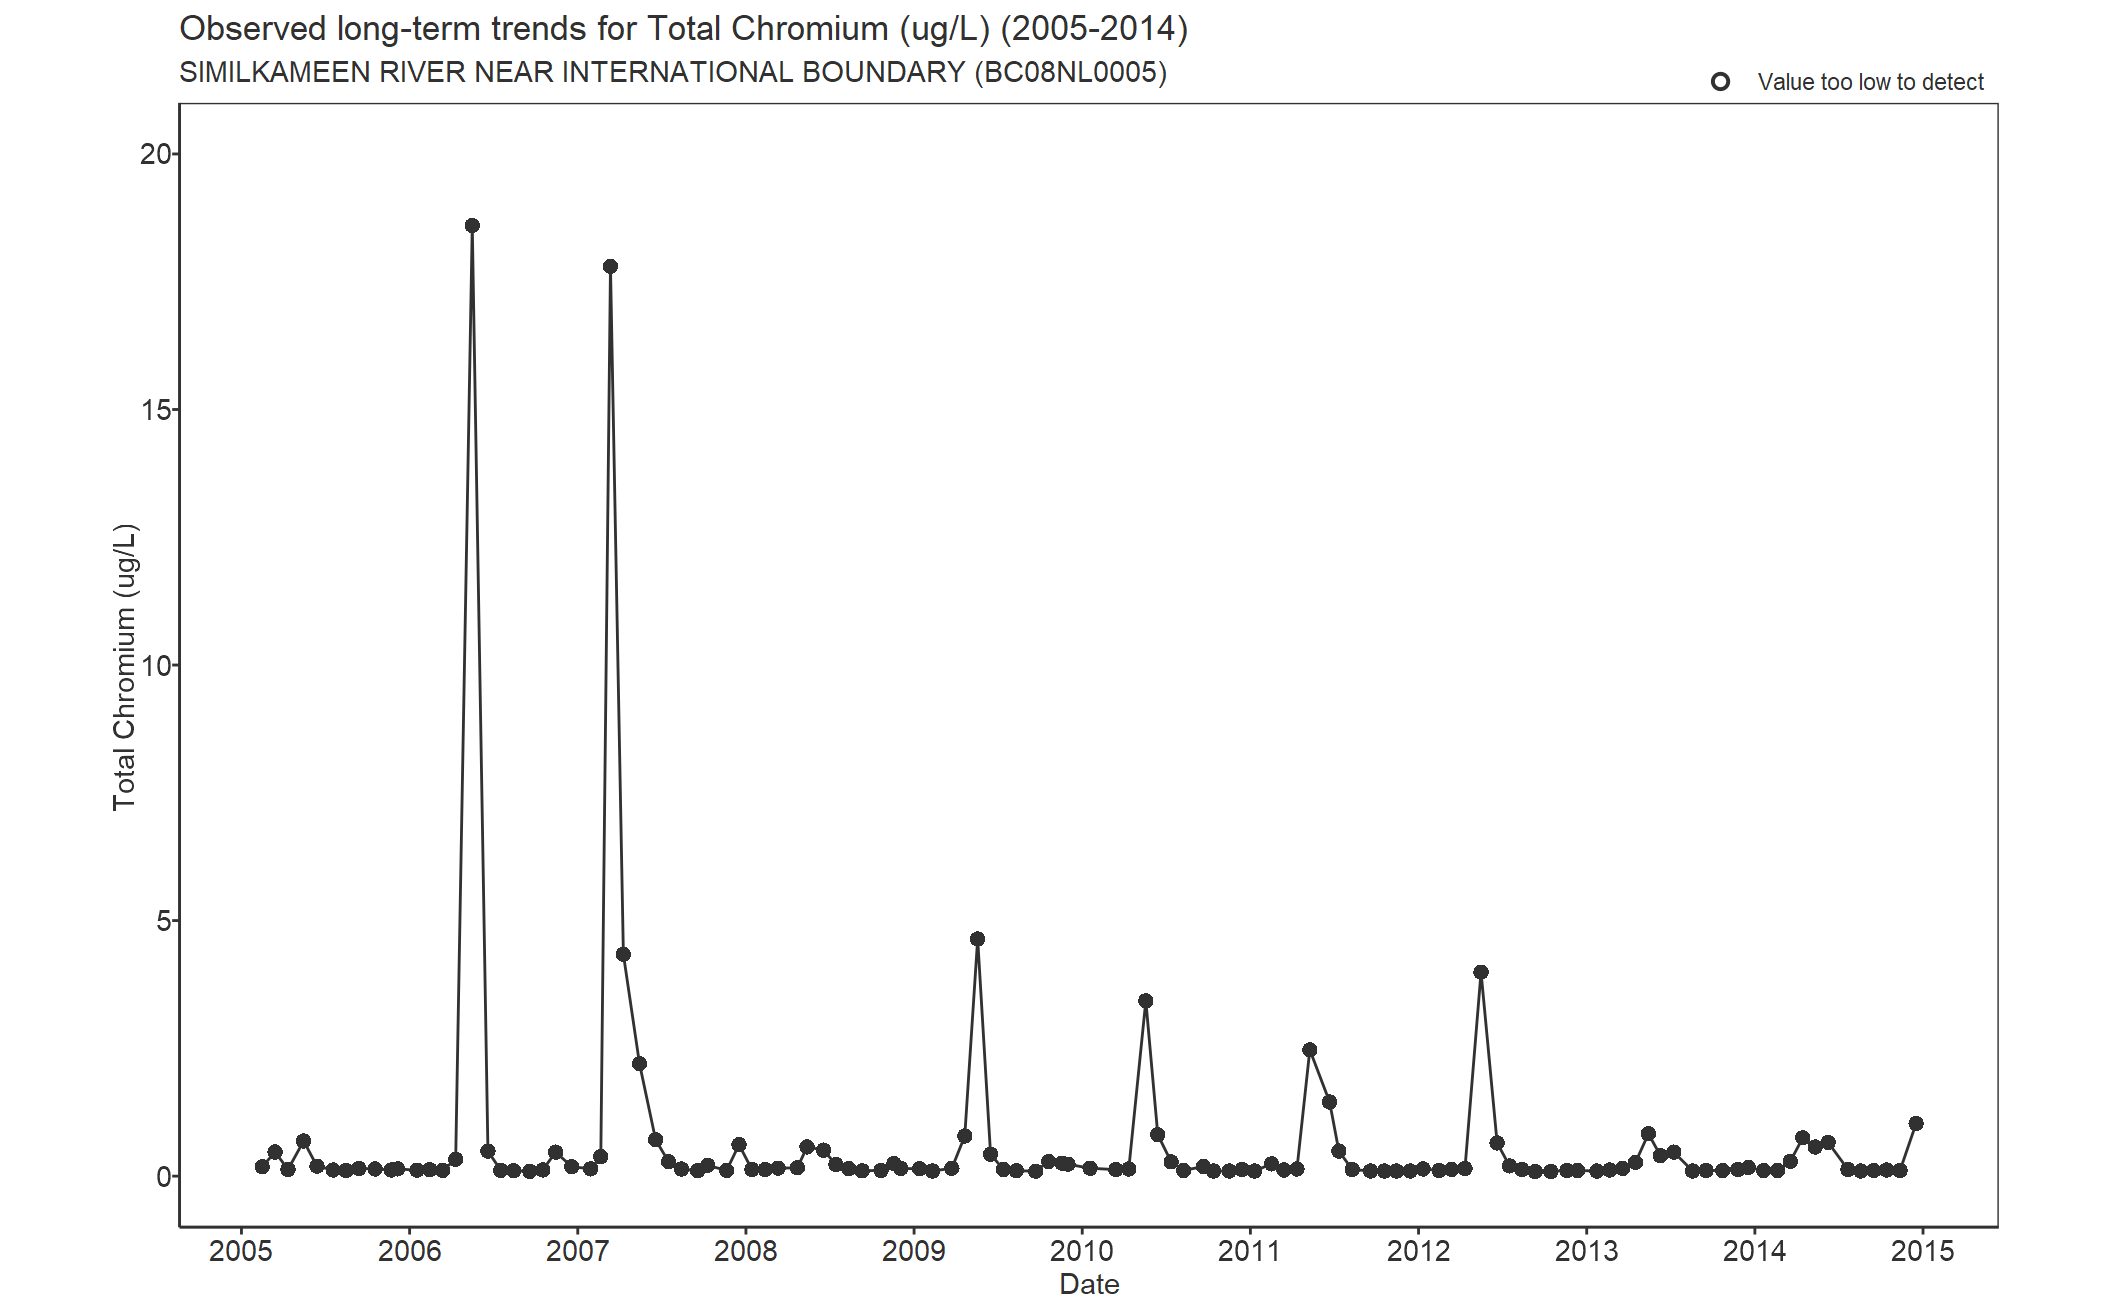 Observed long-term trends for Total Chromium (2005-2014)